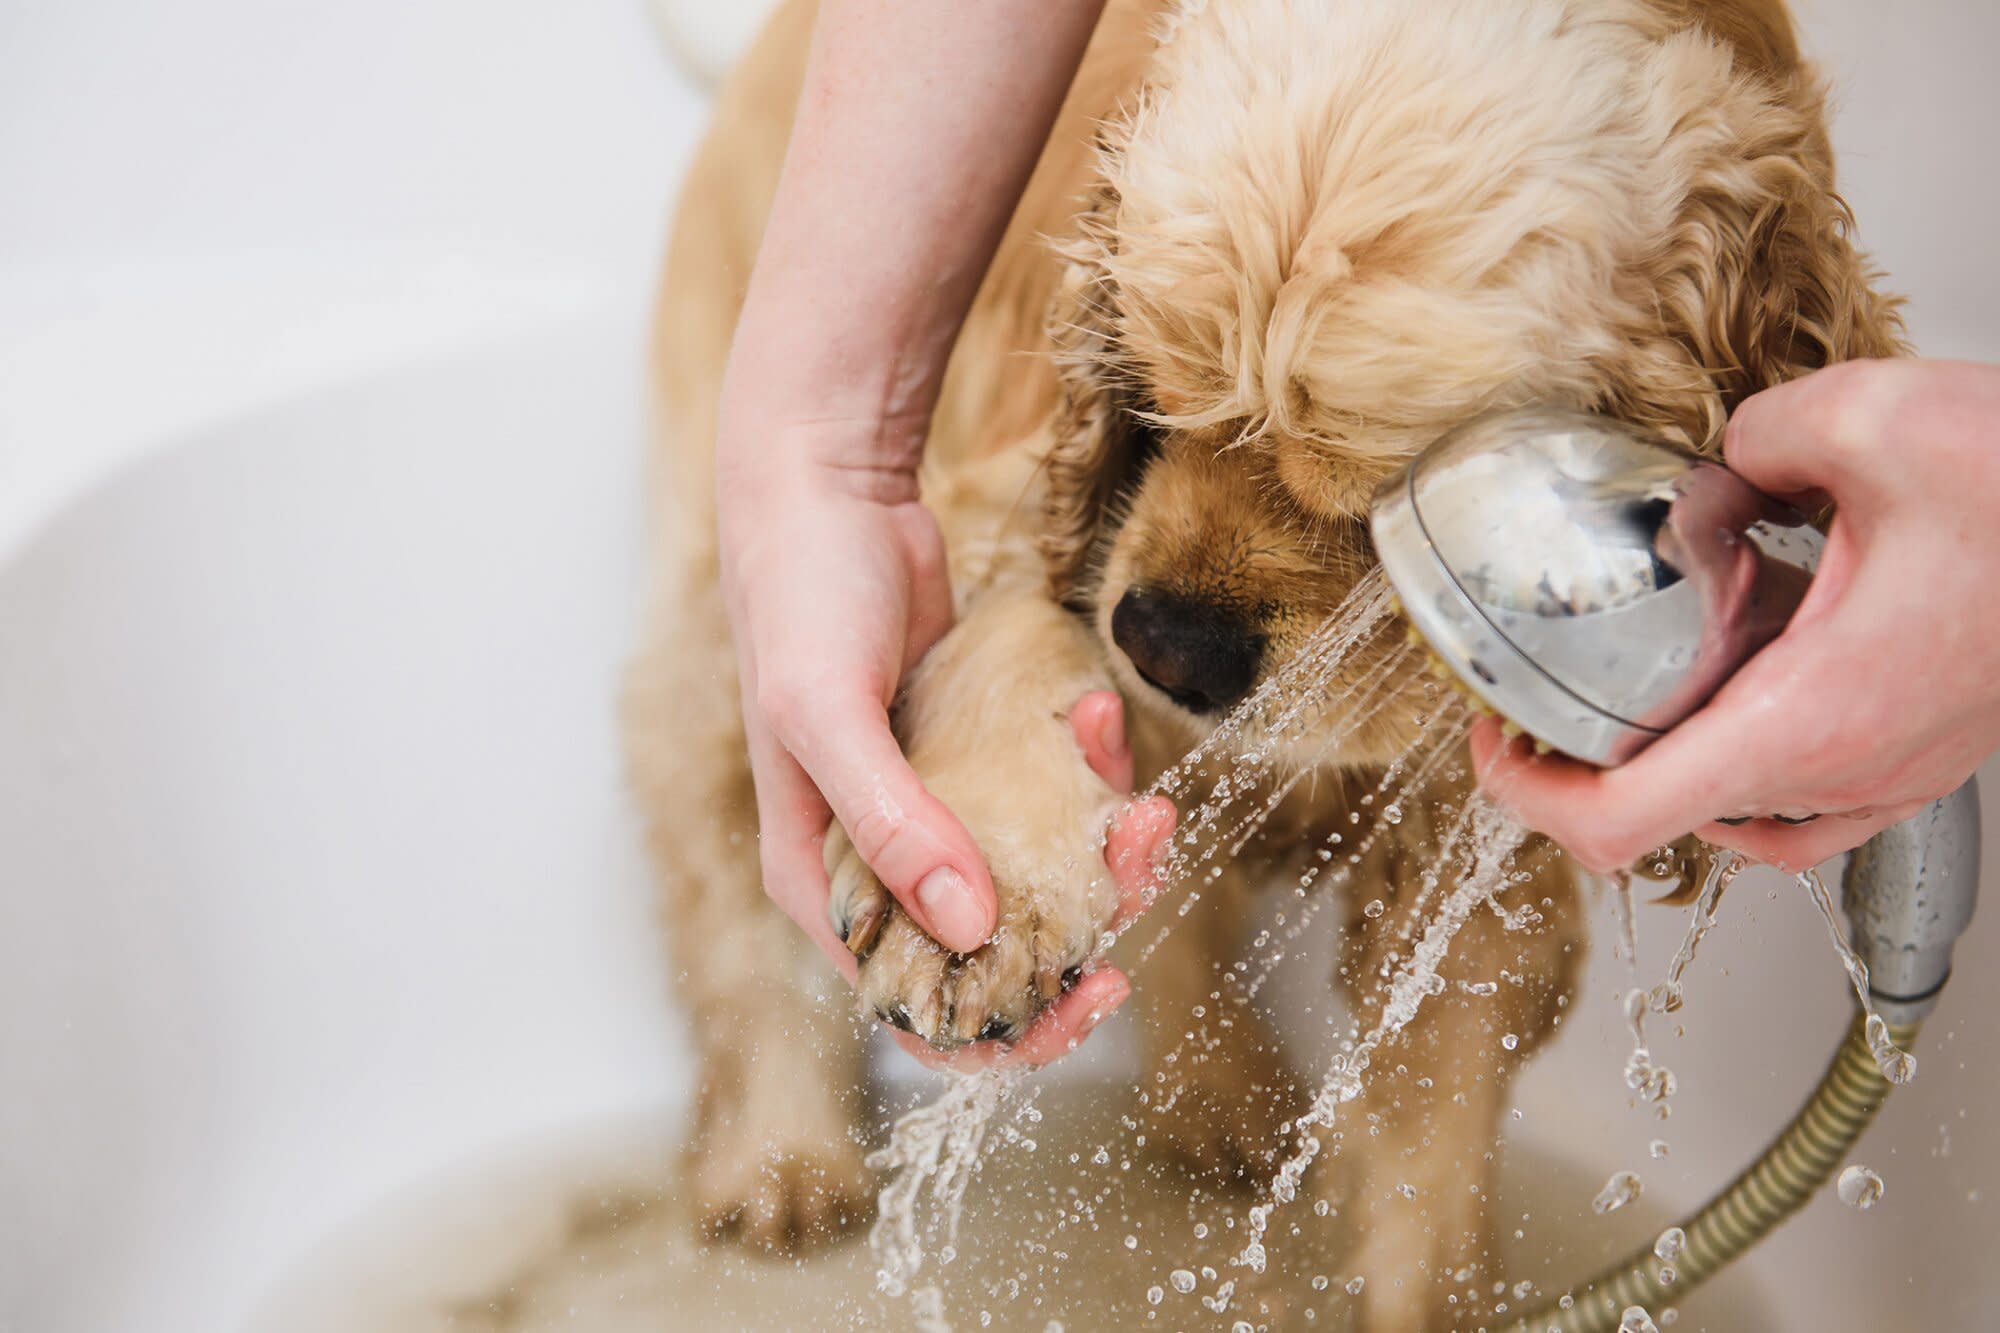 How To Moisturize Your Dogs Dry Flaky Skin To Ease Itchiness And Redness